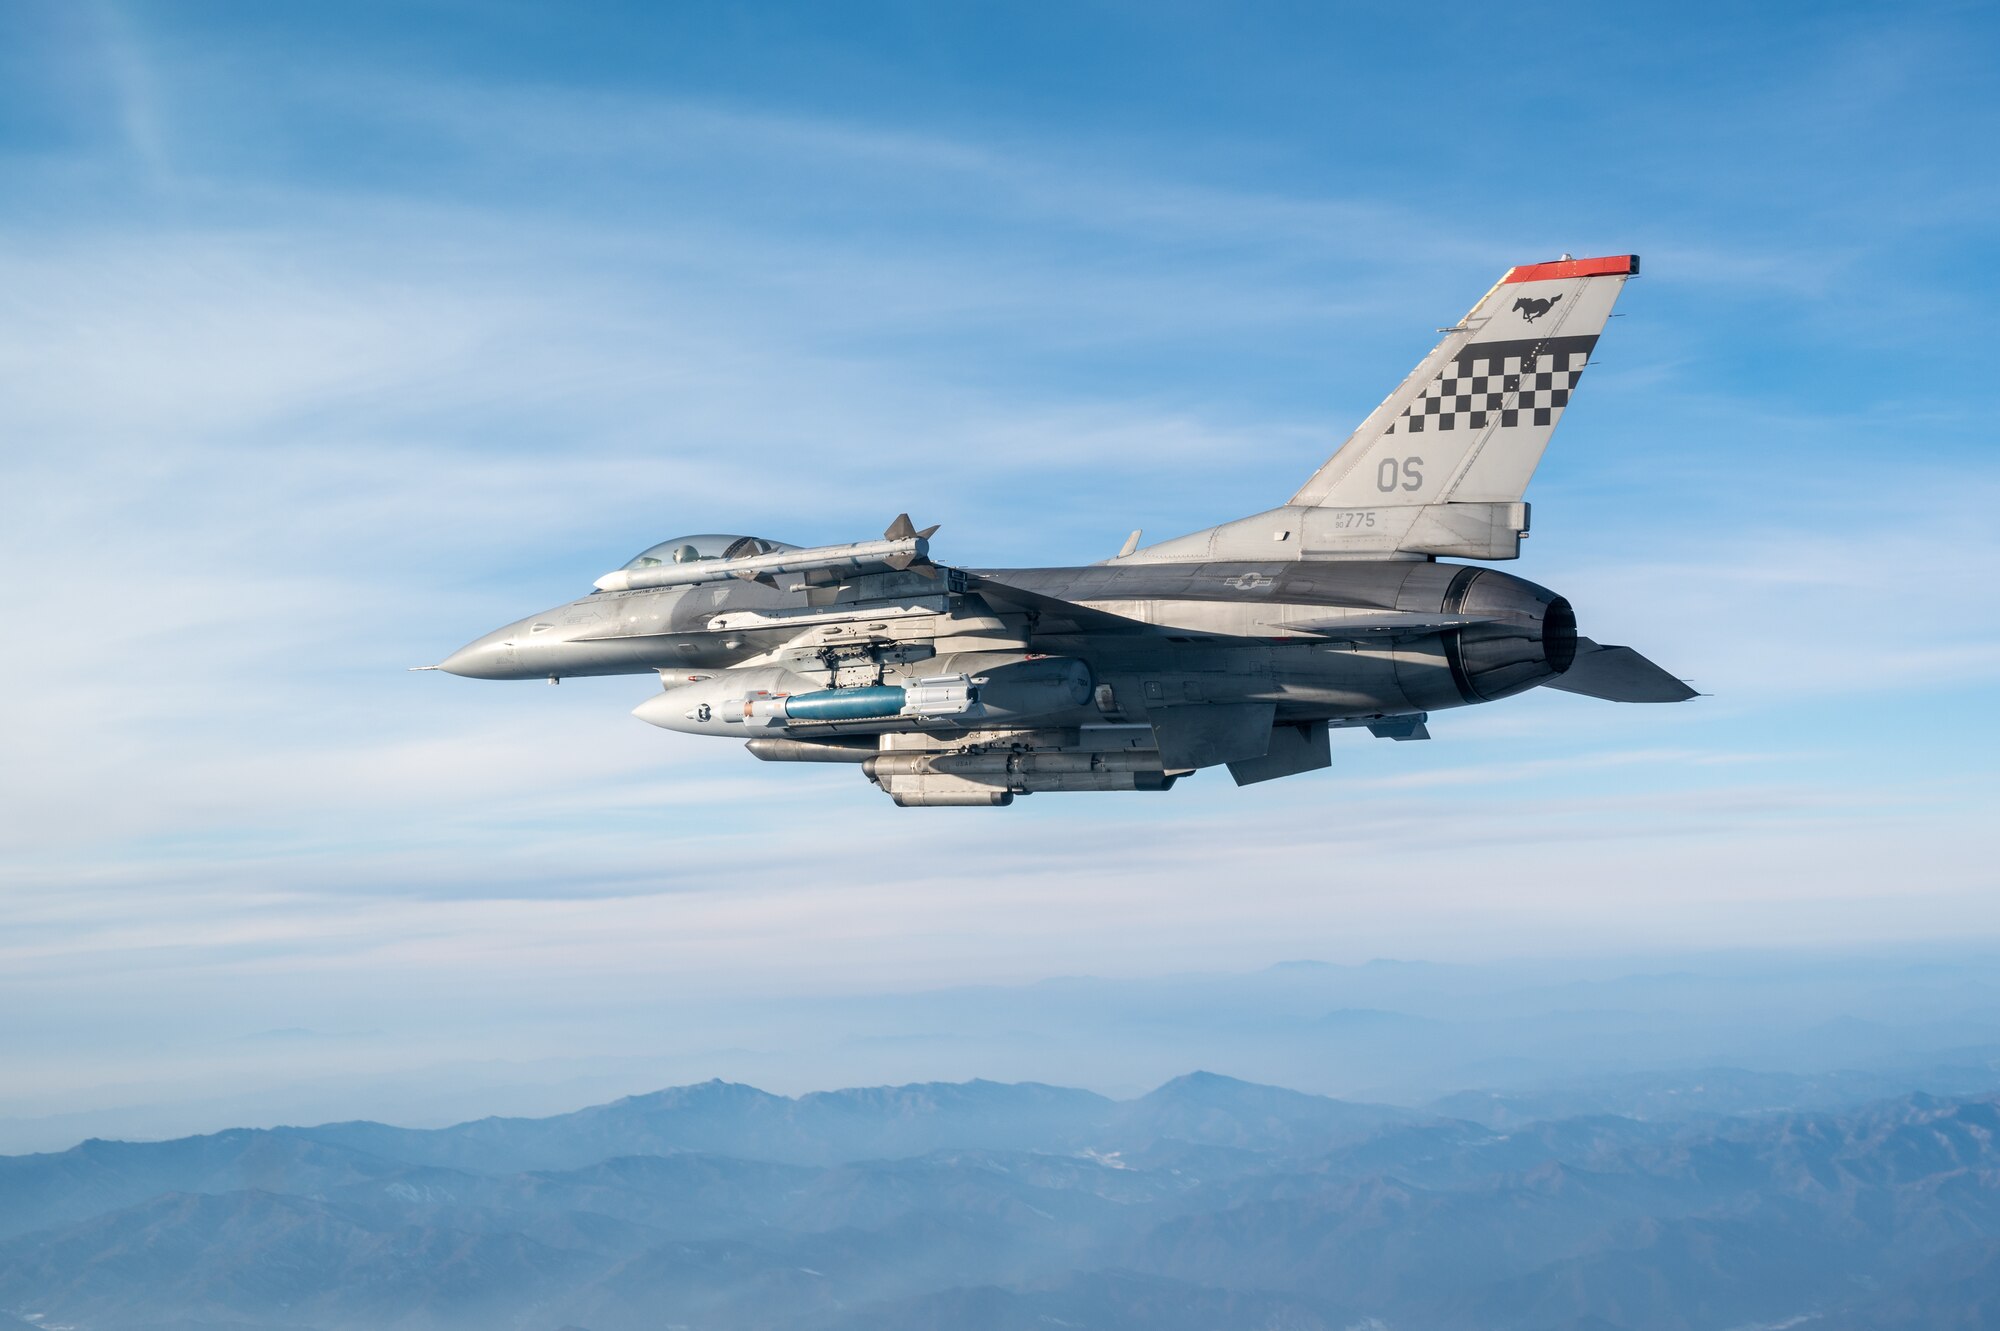 A U.S. Air Force F-16 Fighting Falcon assigned to the 36th Fighter Squadron participates in close air support (CAS) training over Gyeonggi-do, Republic of Korea, Dec. 20, 2022.